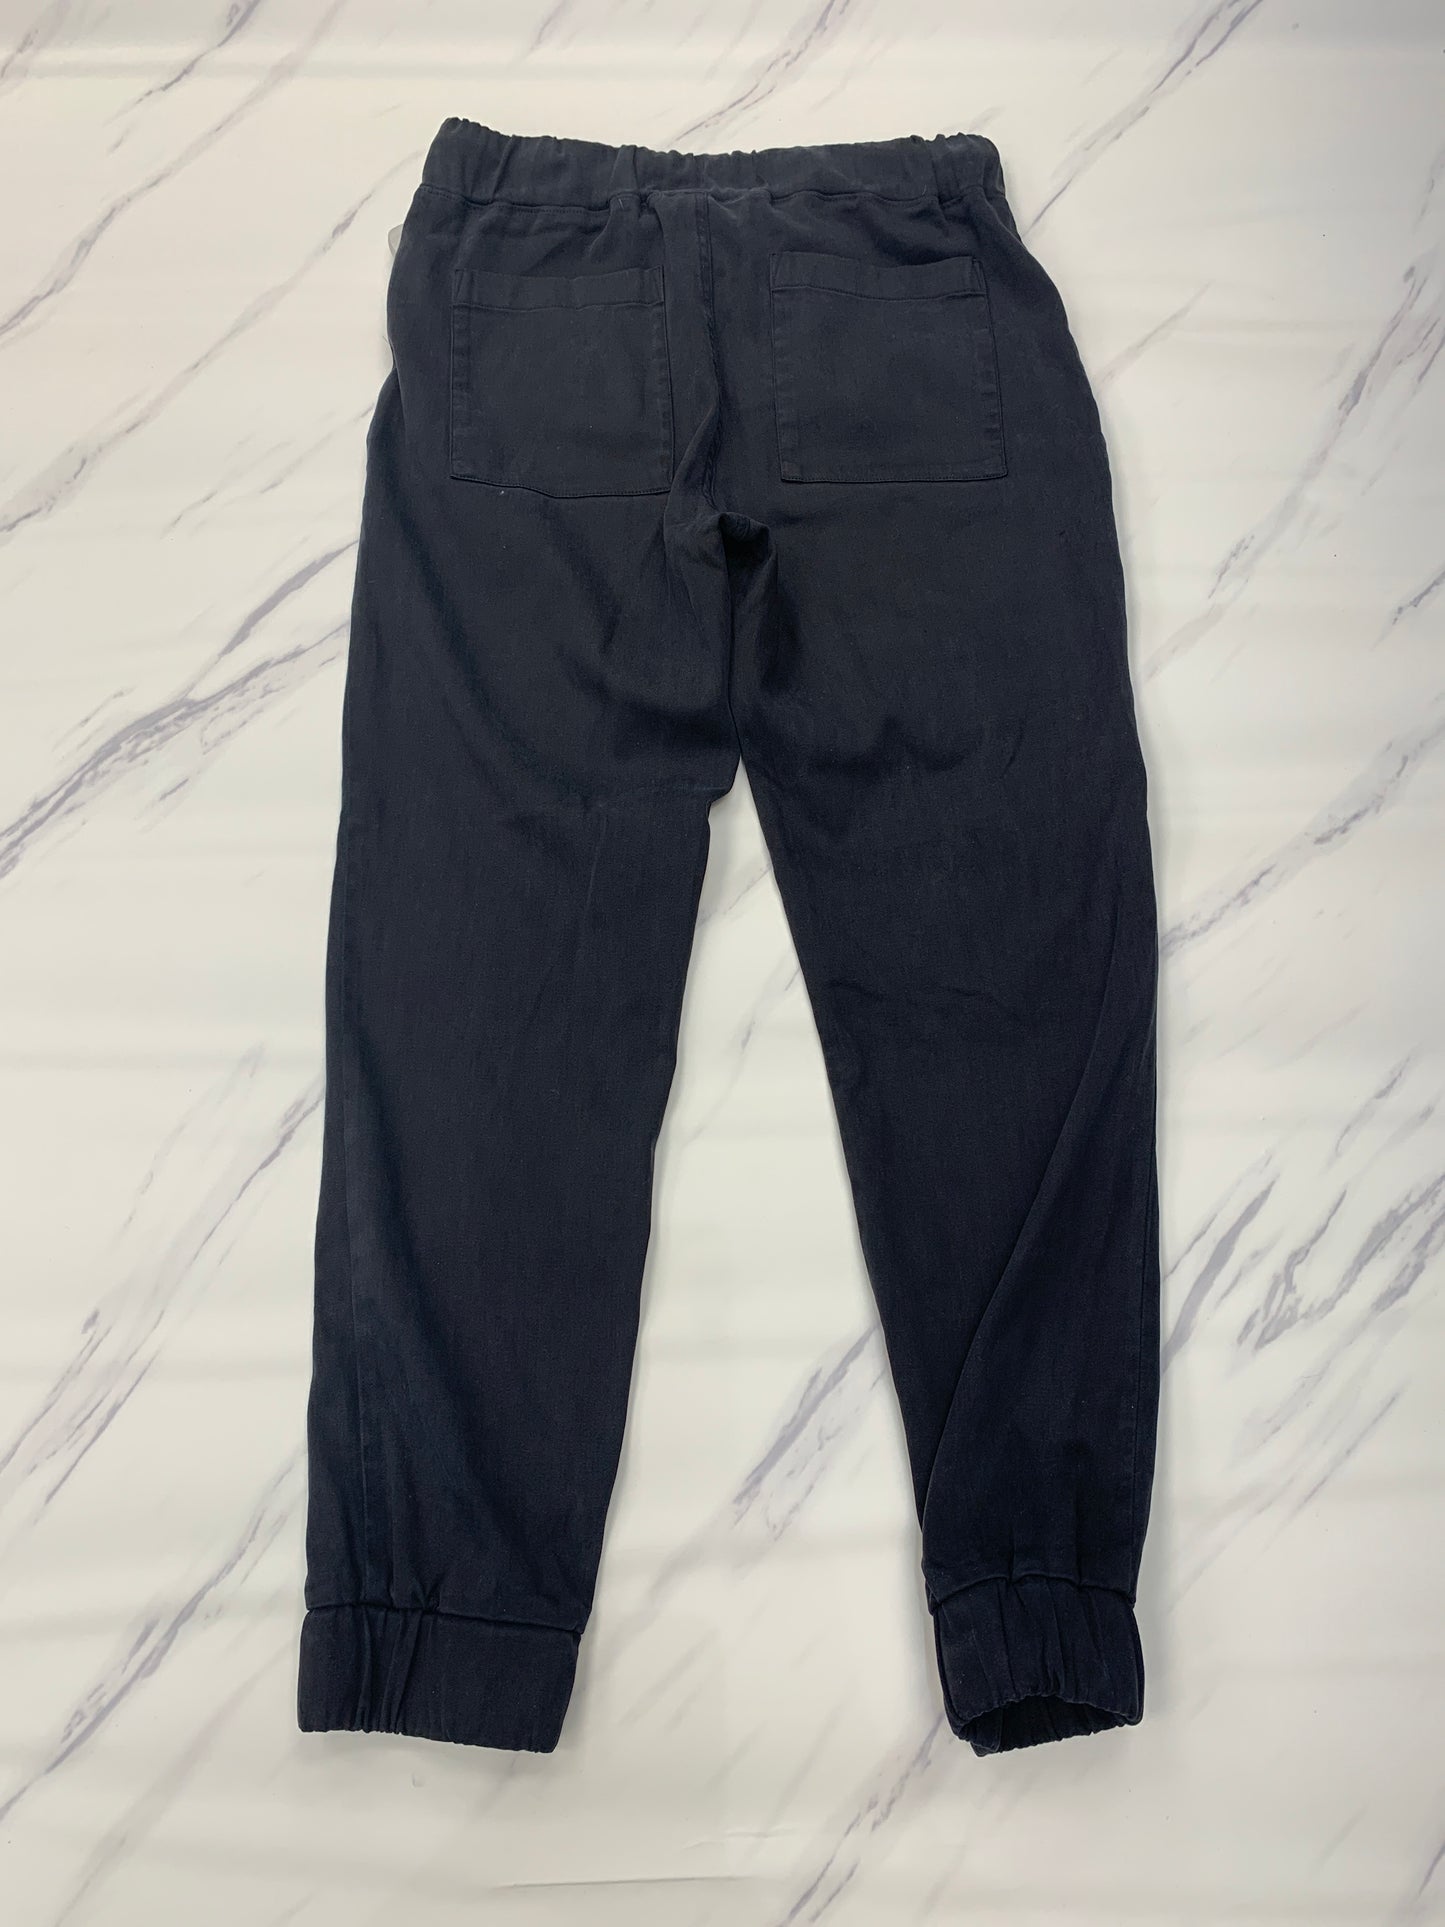 Pants Joggers By Cloth & Stone  Size: Xs